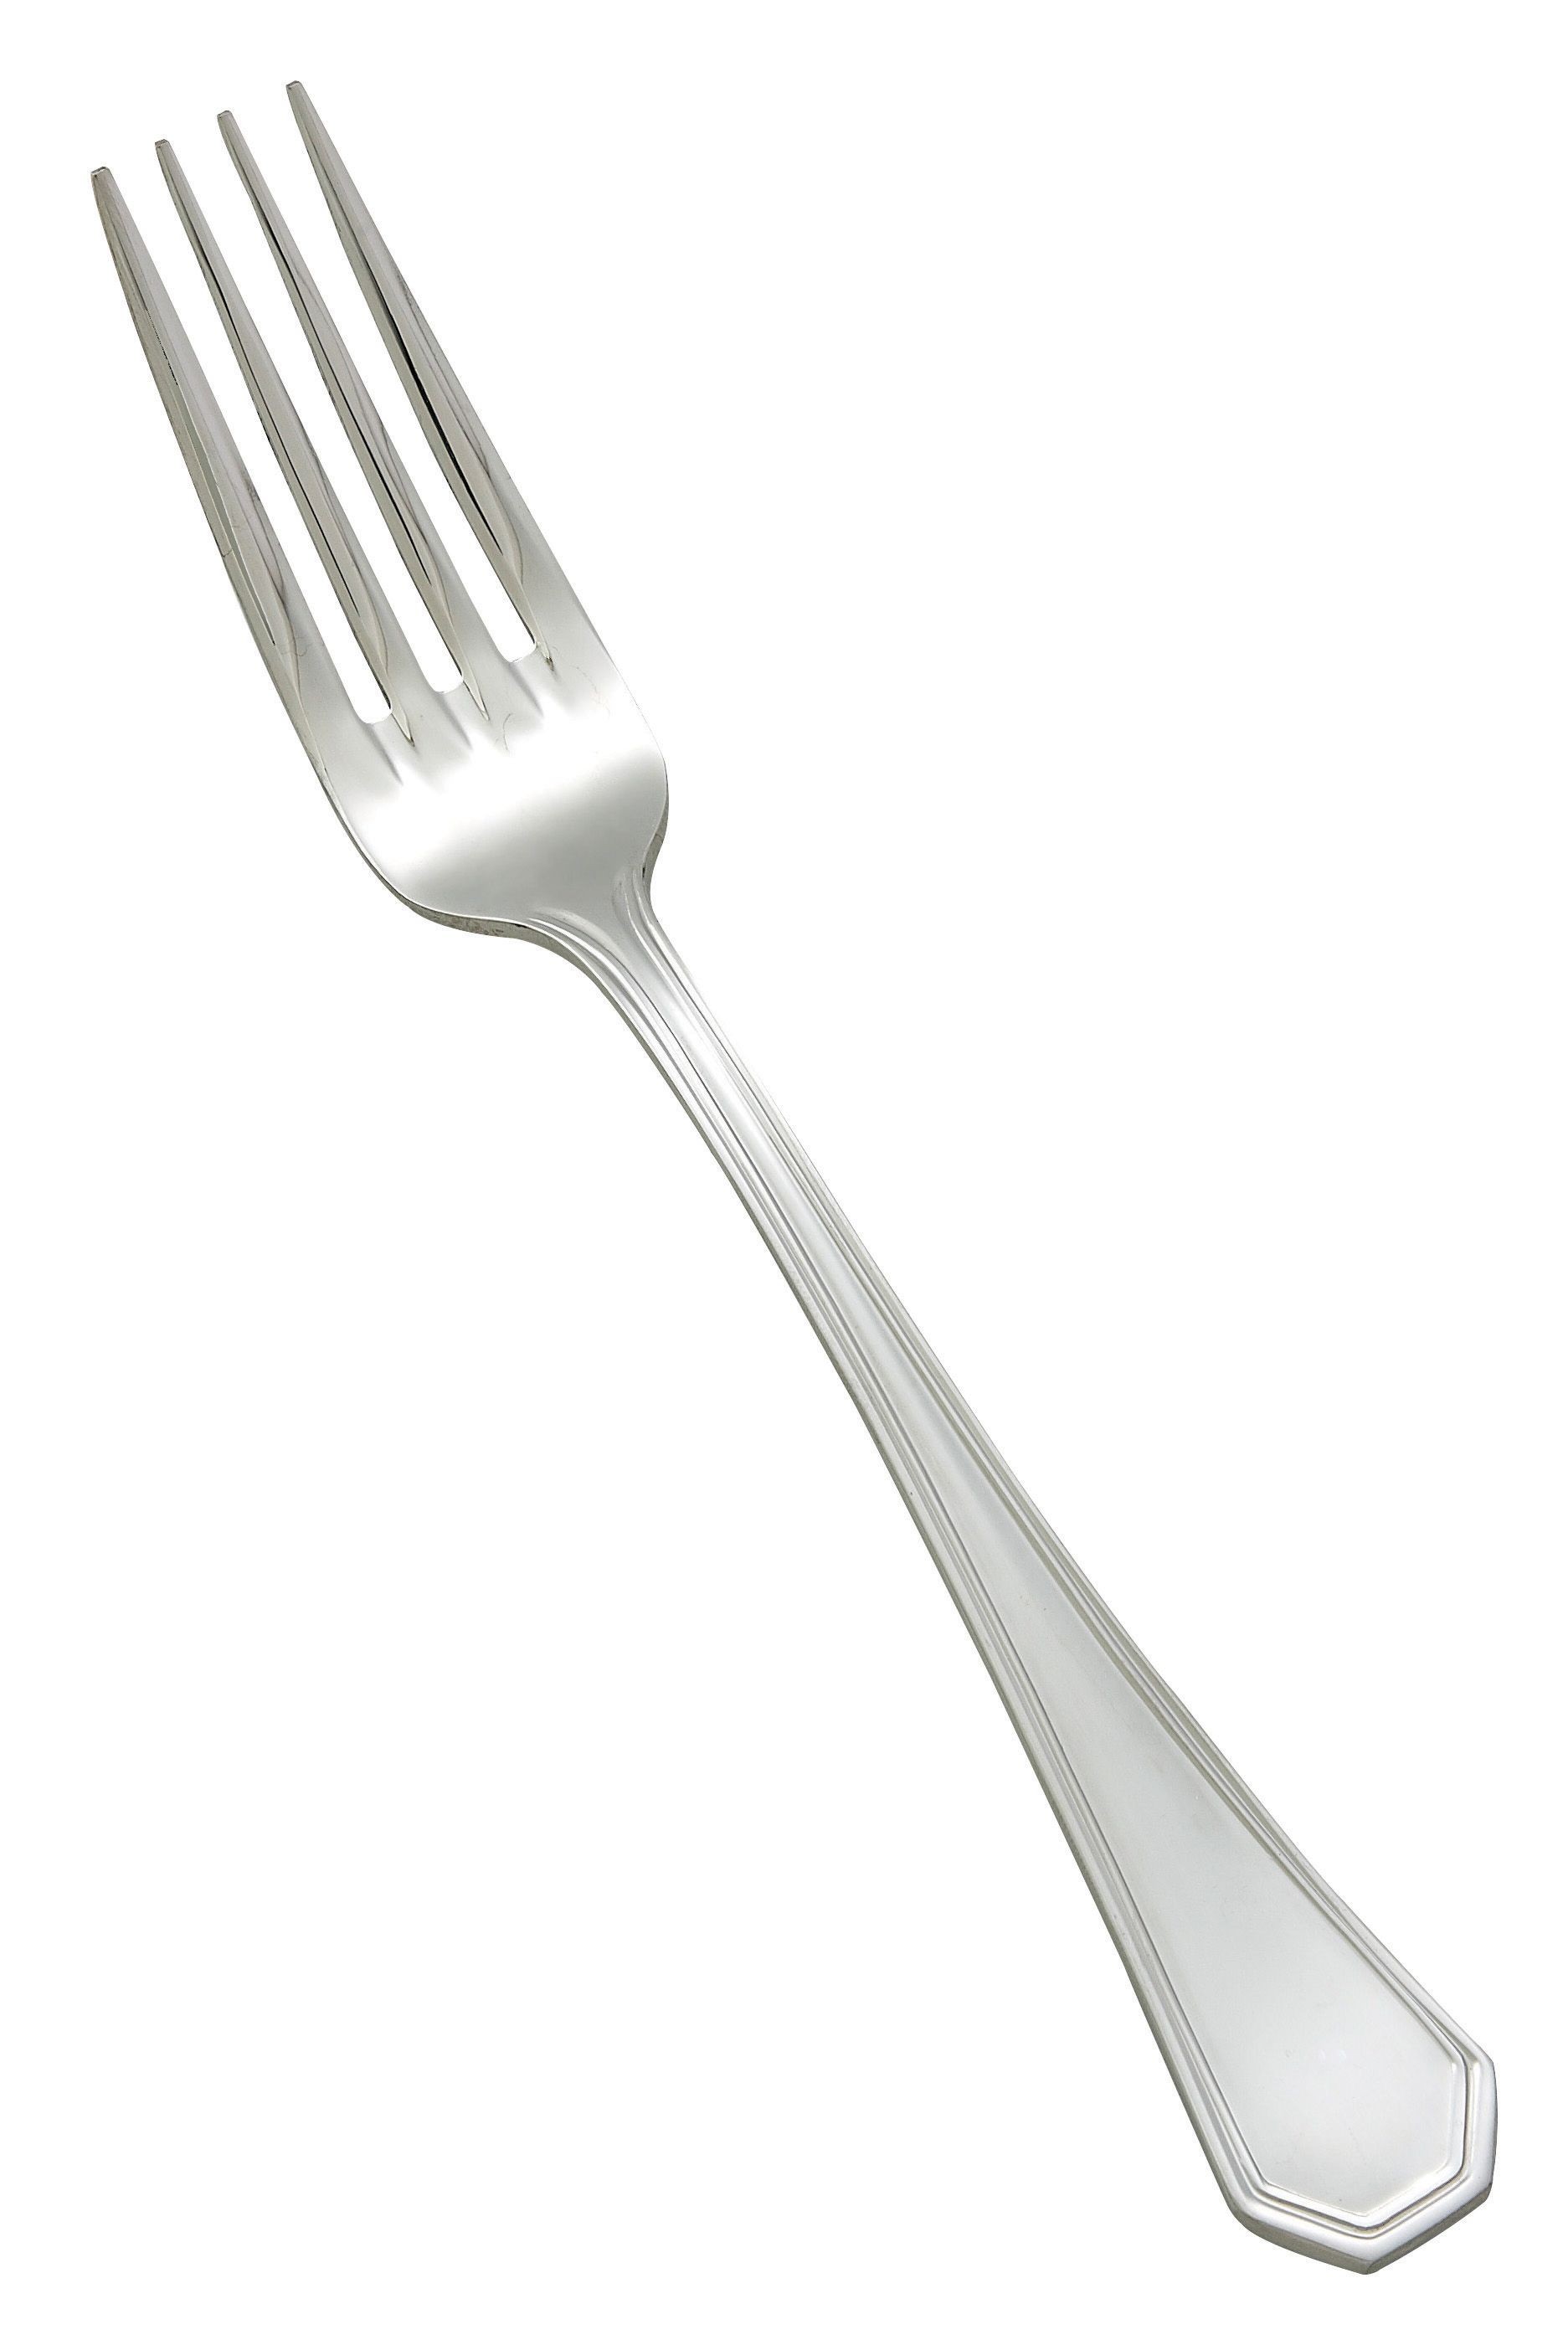 Winco 0035-11 Victoria Extra Heavy Stainless Steel European Table Fork (12/Pack)